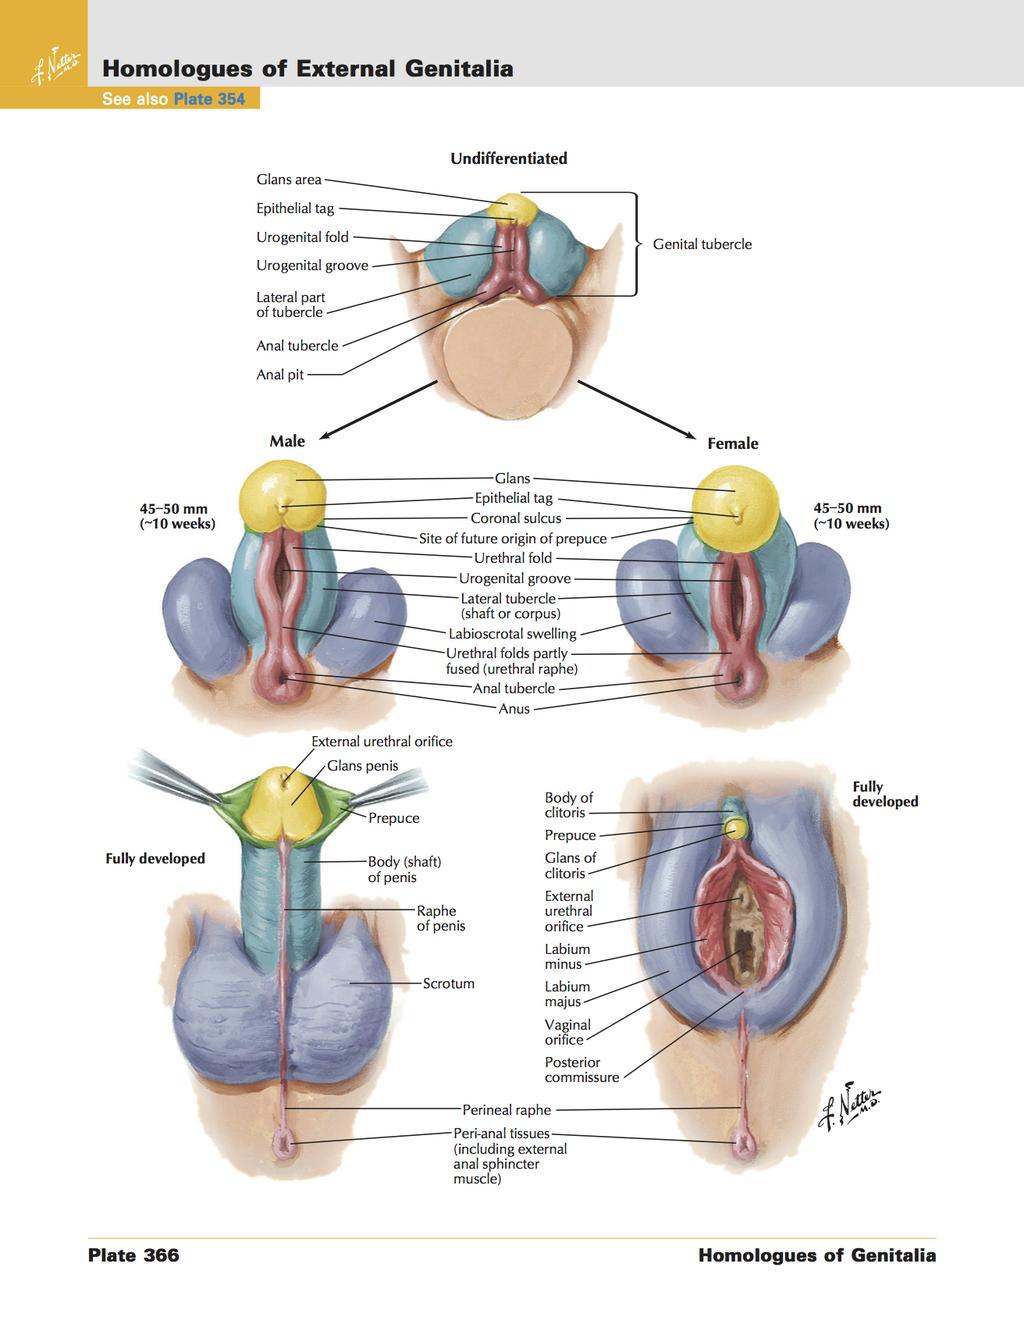 EMBRYOLOGY The vaginal lips are a vaginal folder from the urogenital sein.